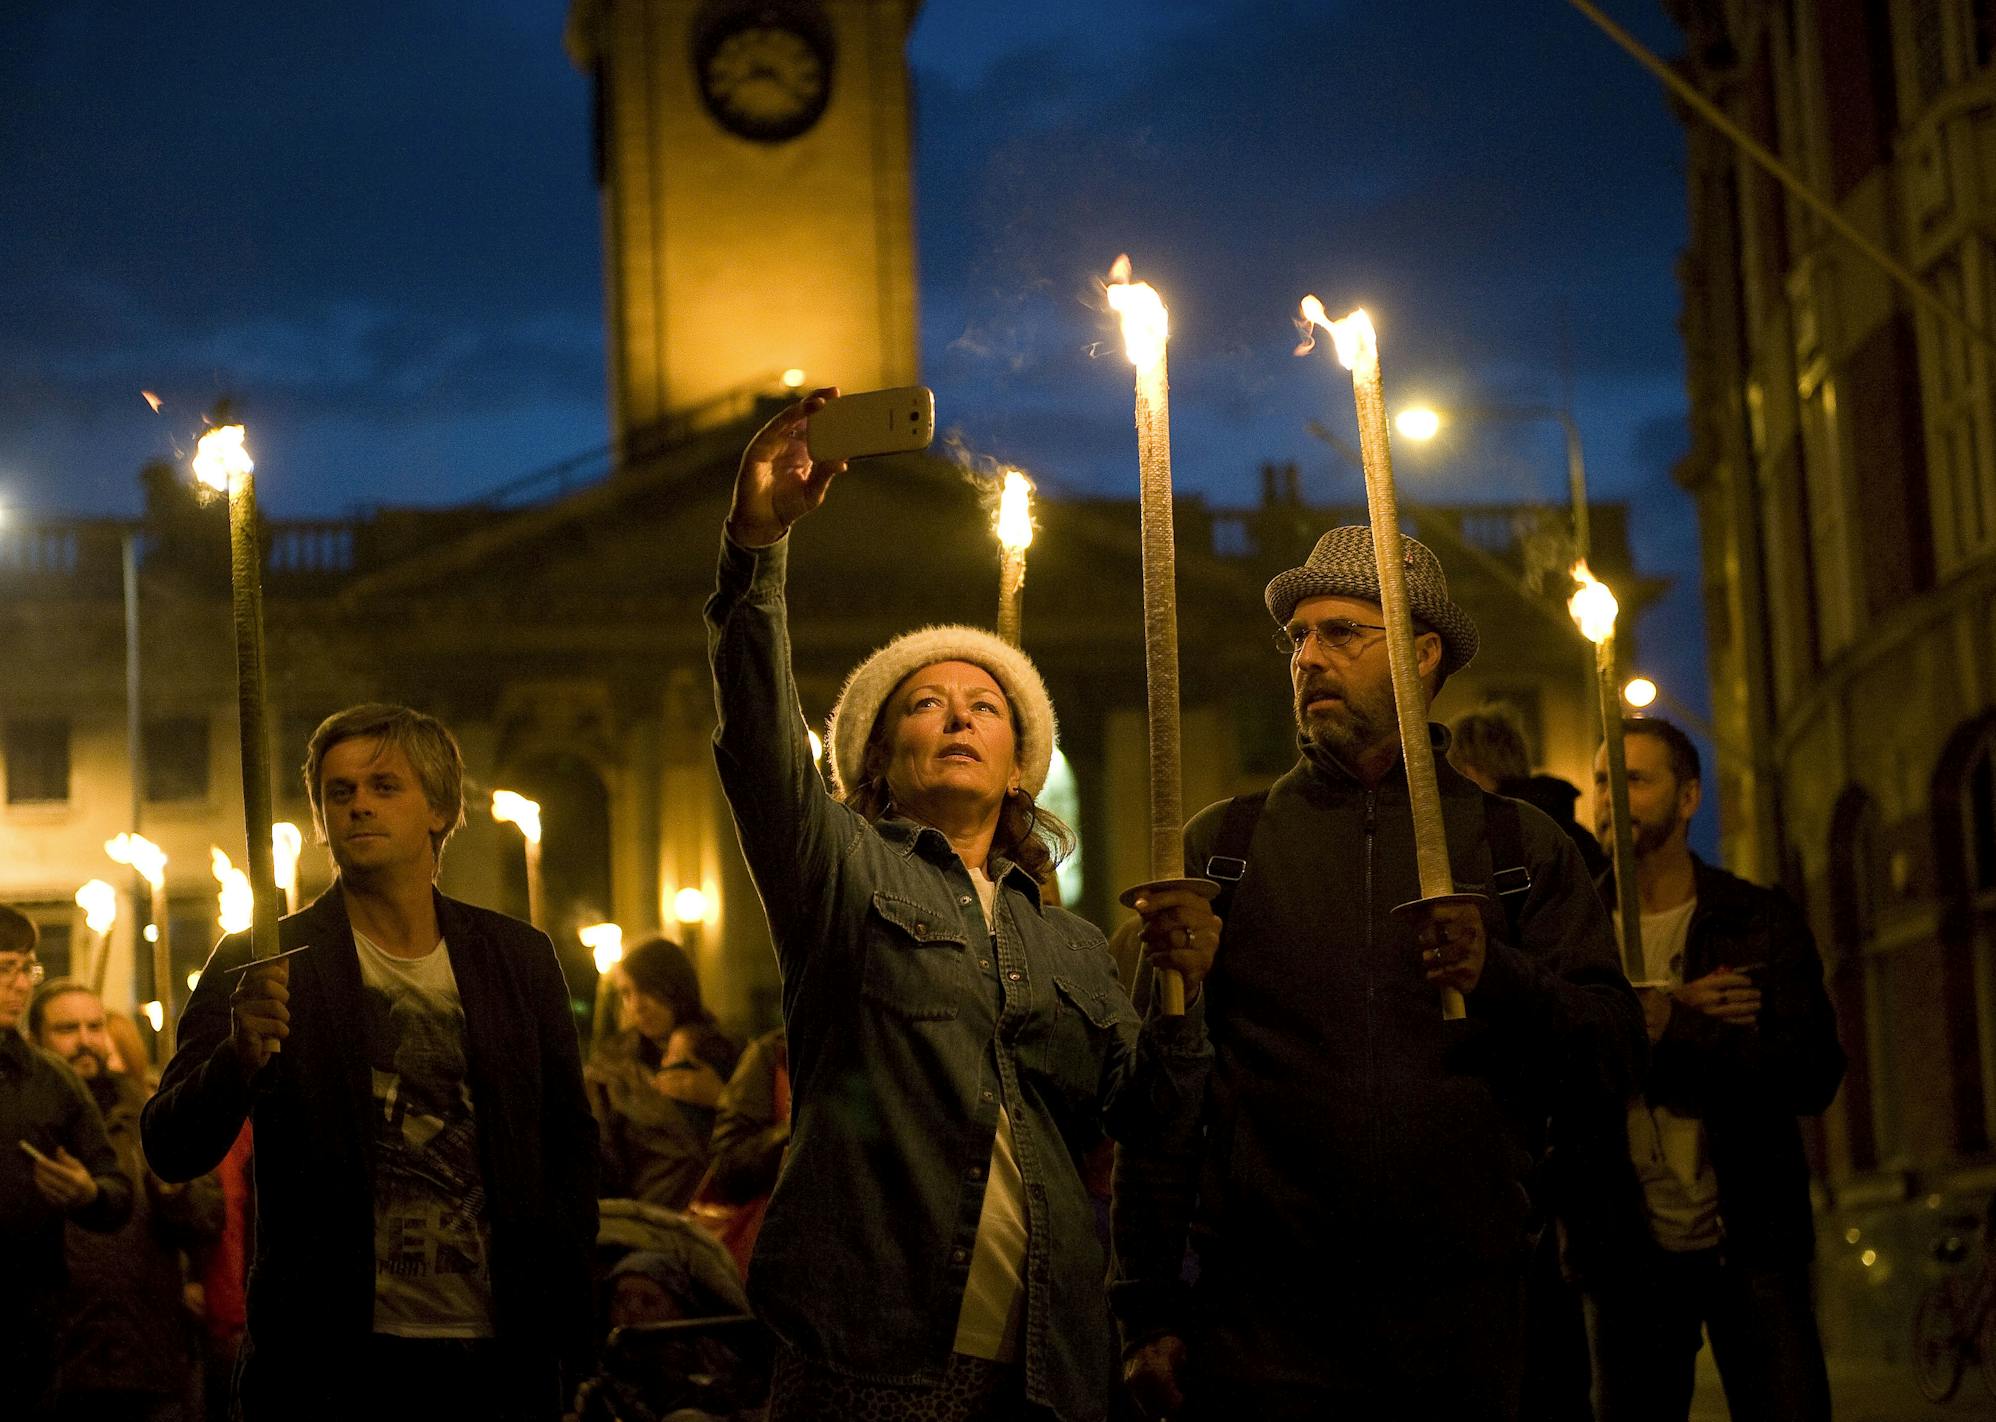 A procession of people carrying torches